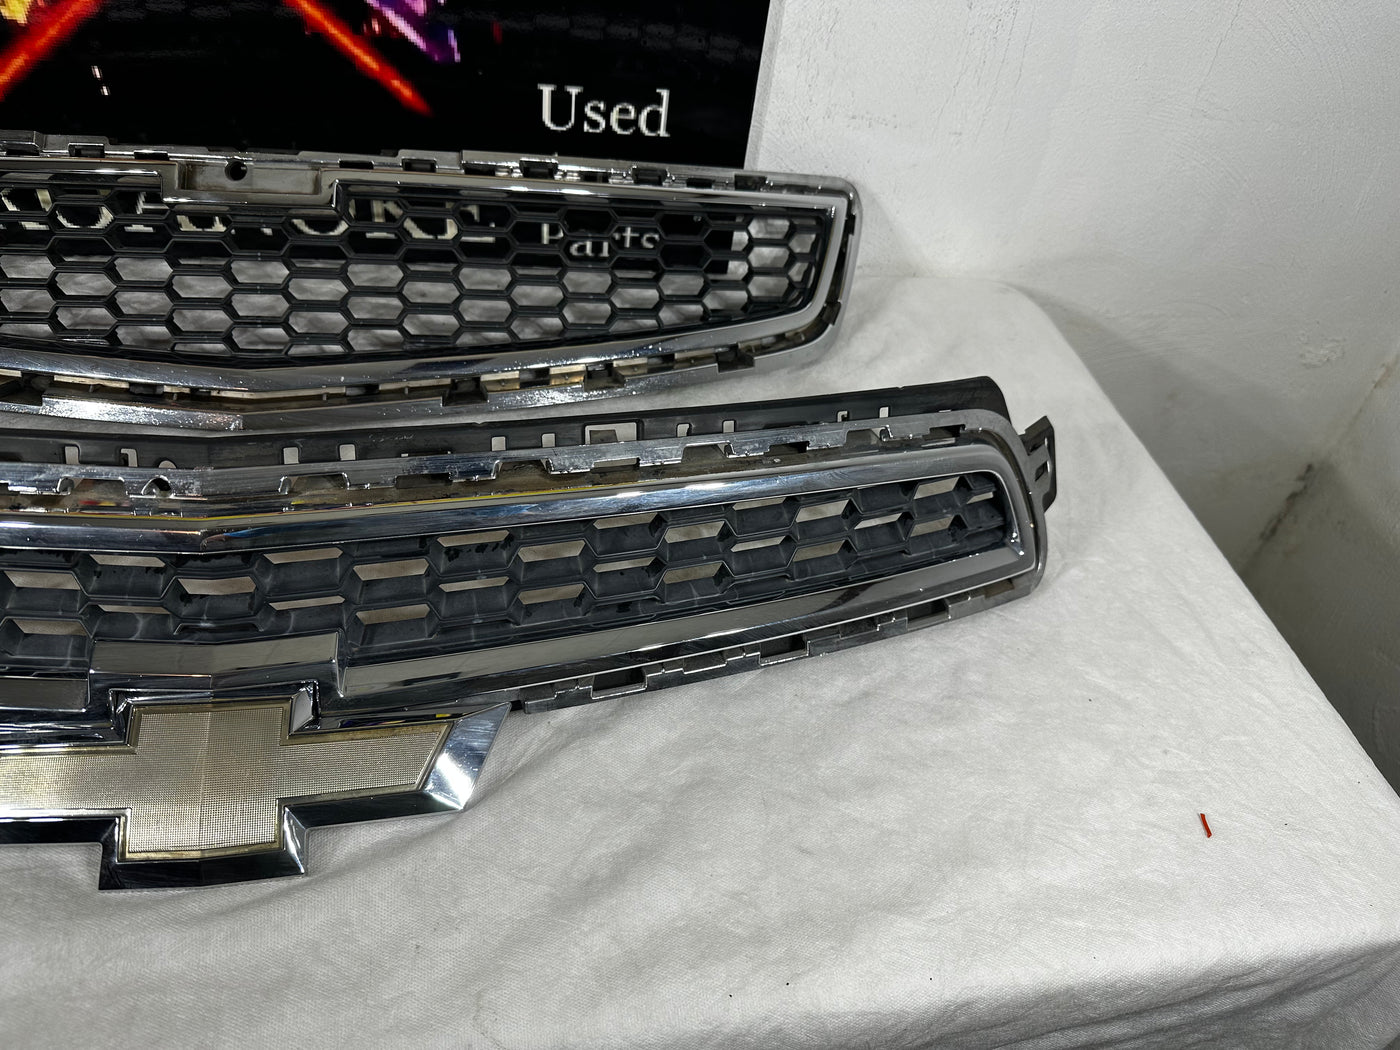 2013 CHEVY MALIBU FRONT UPPER GRILL TOP & Bottom Whole Set OEM